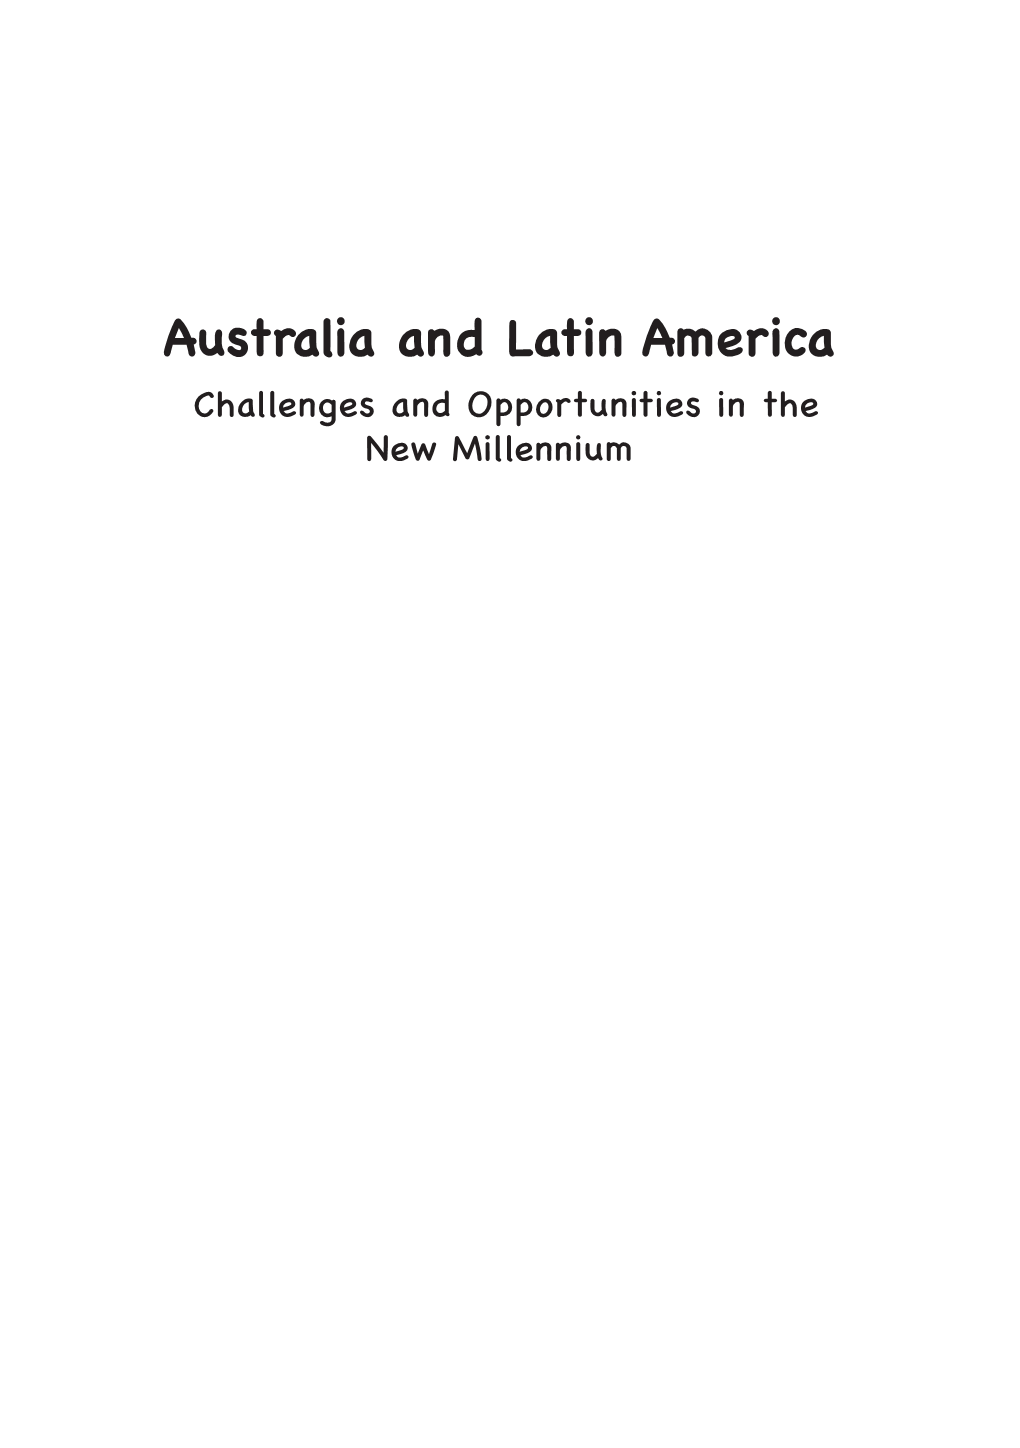 Australia and Latin America Challenges and Opportunities in the New Millennium